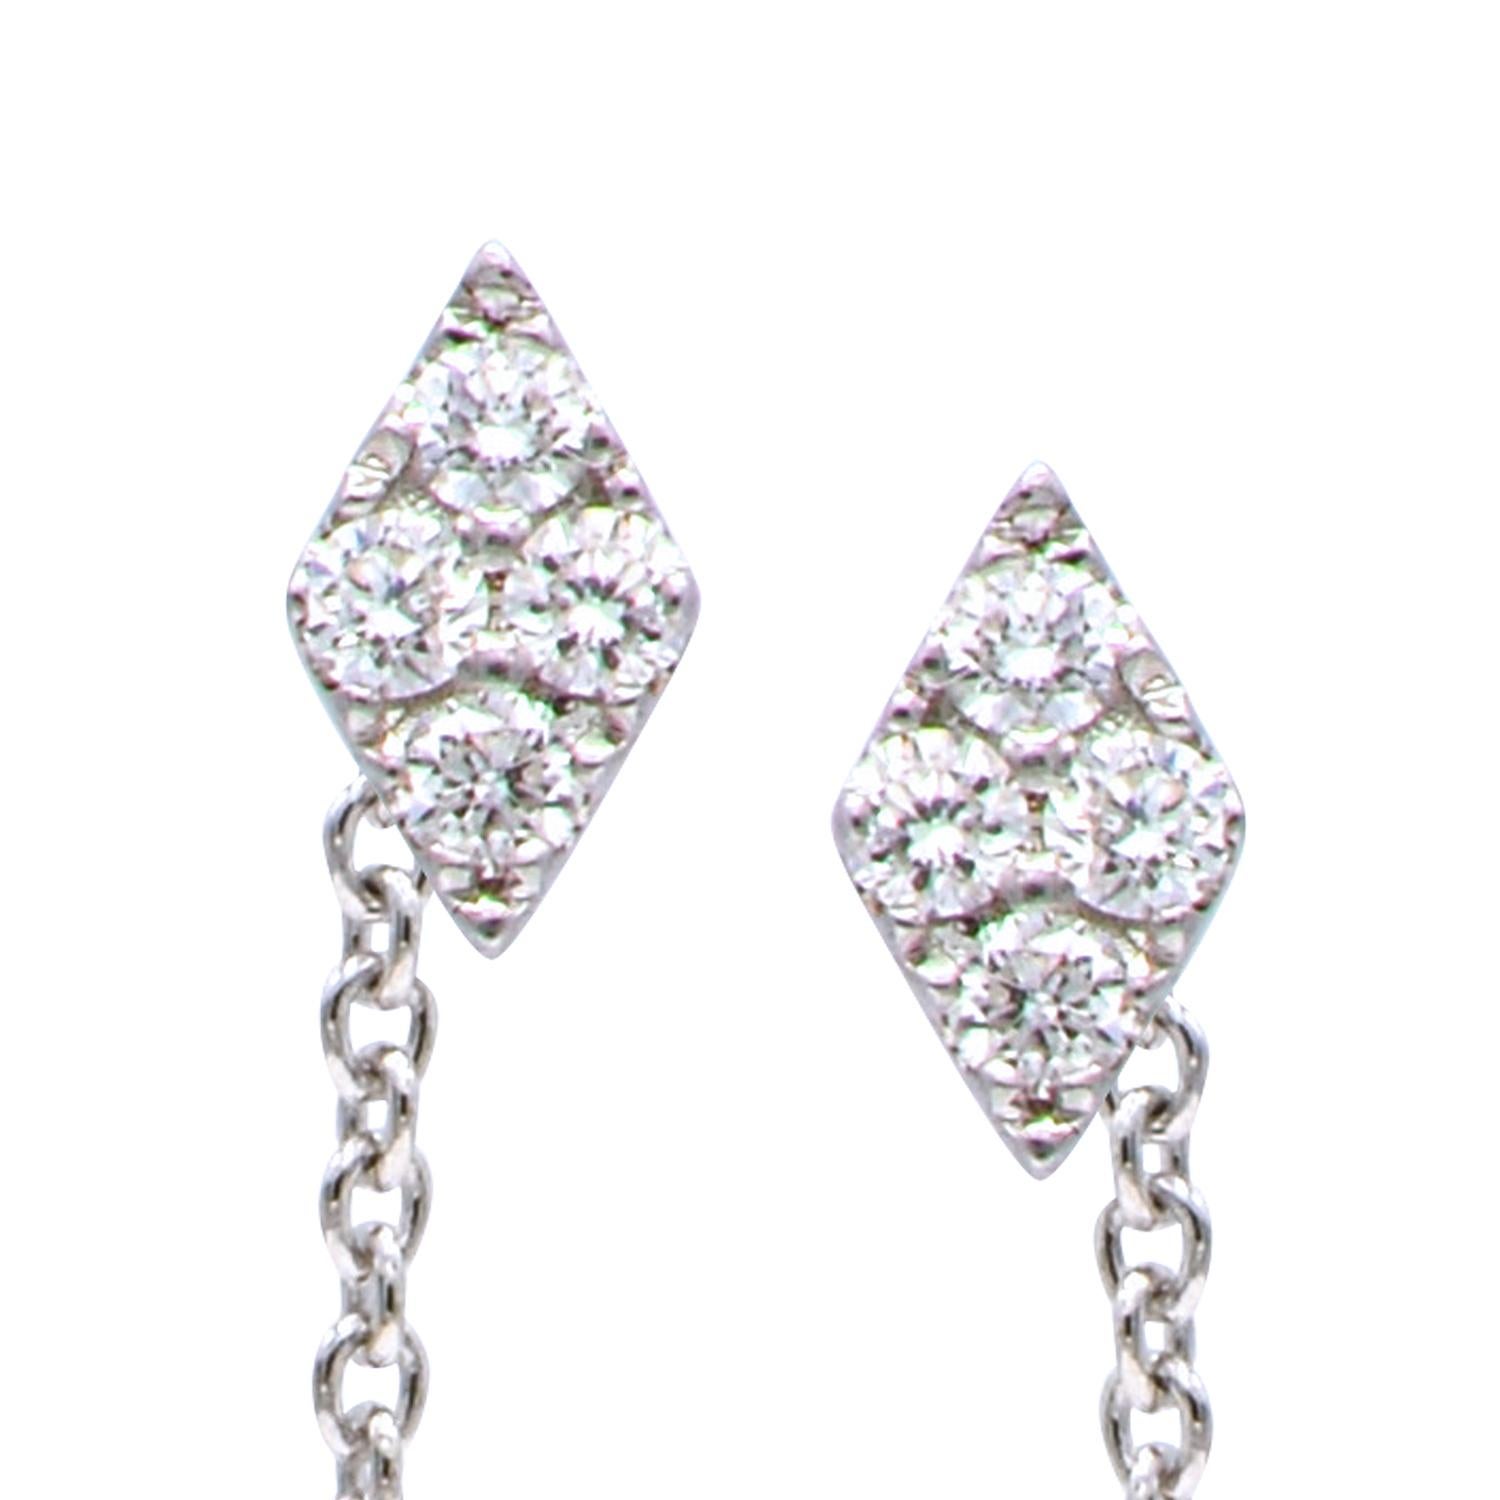 These fun modern earrings are made from 0.9 grams of 14 karat white gold. They have a post and chain that threads through the ear and hangs in the back and is finished with a diamond shape stud that contains 8 diamonds totaling 0.14 carats. These